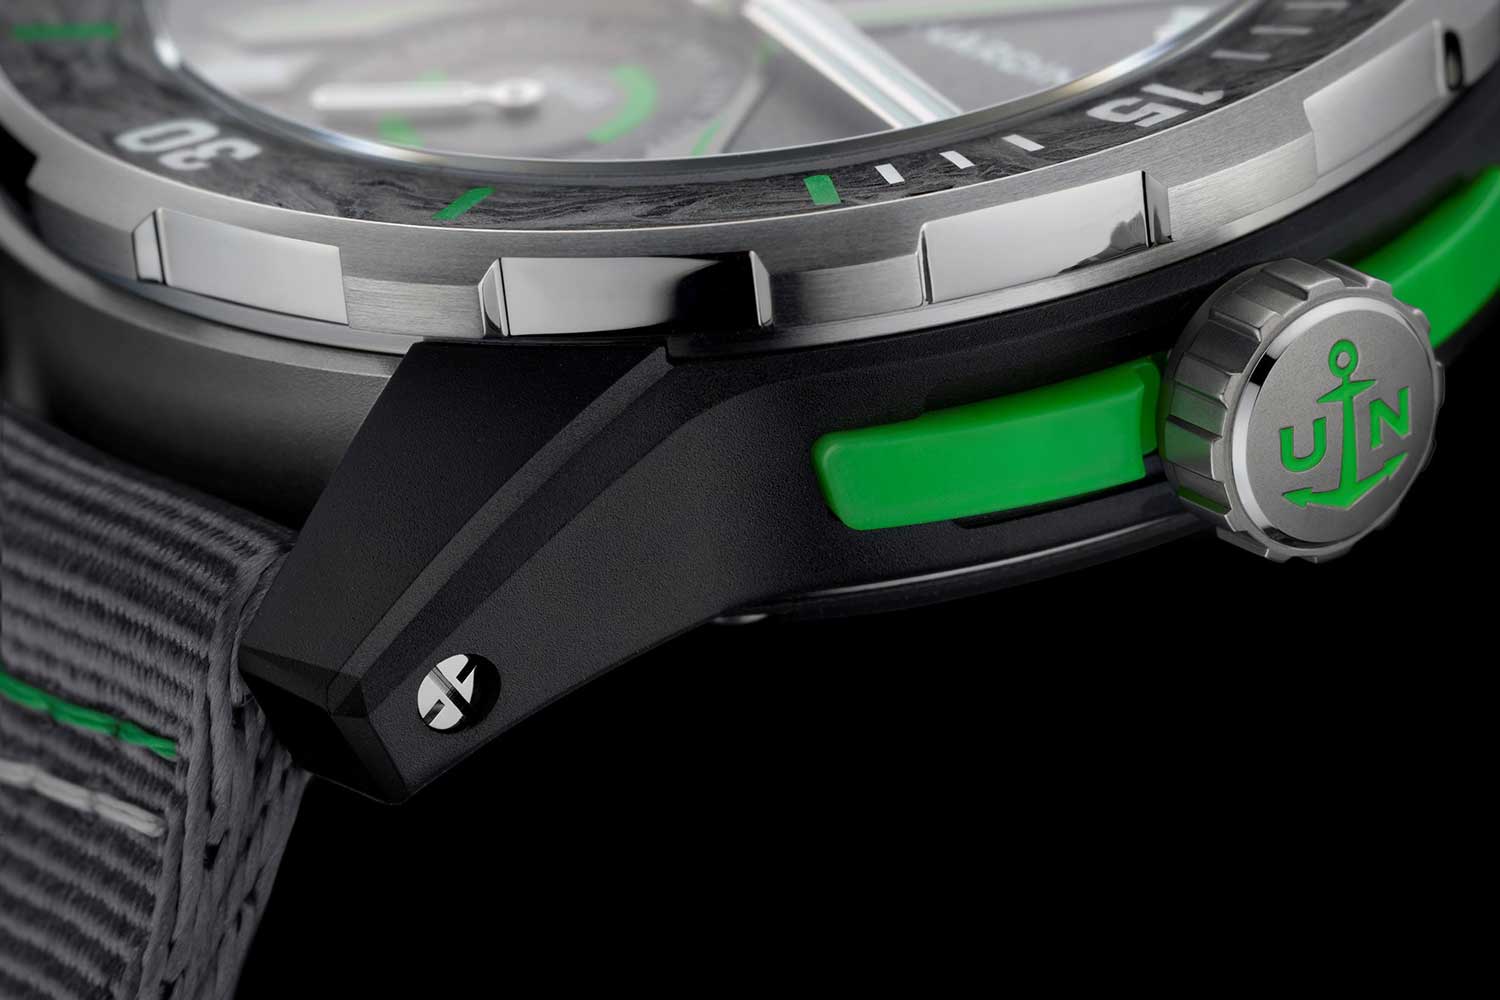 Along with the Nylo and Carbonium used in the 44mm case, recycled steel is used for other part, like the bezel, which includes a Carbonium insert. Green touches abound on the case, dial and strap.